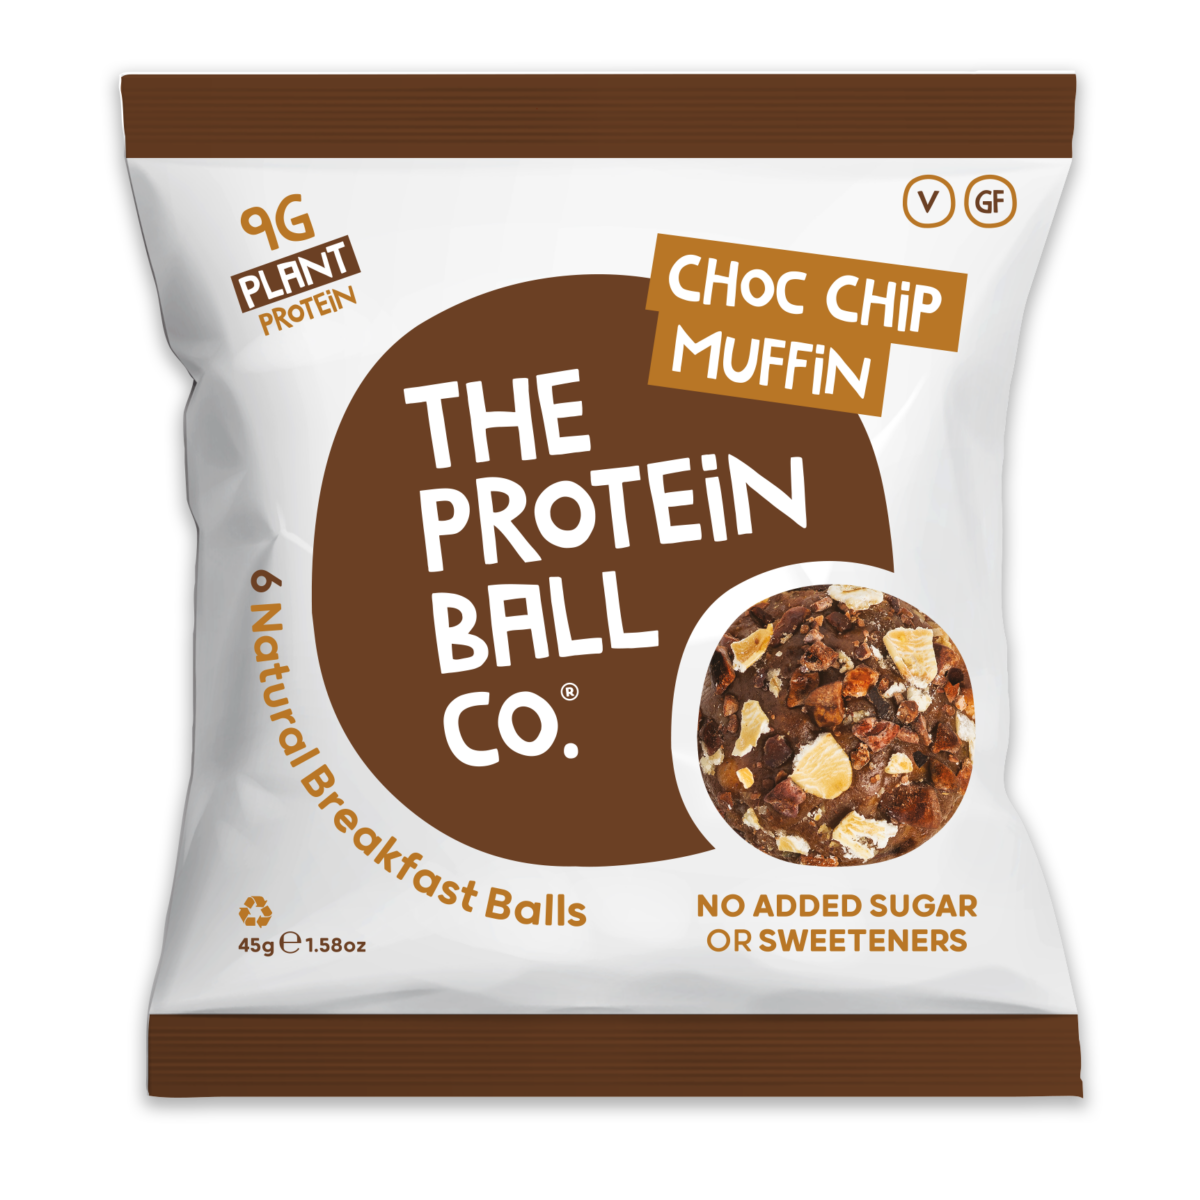 Plant-based protein balls from the Protein Ball Co.